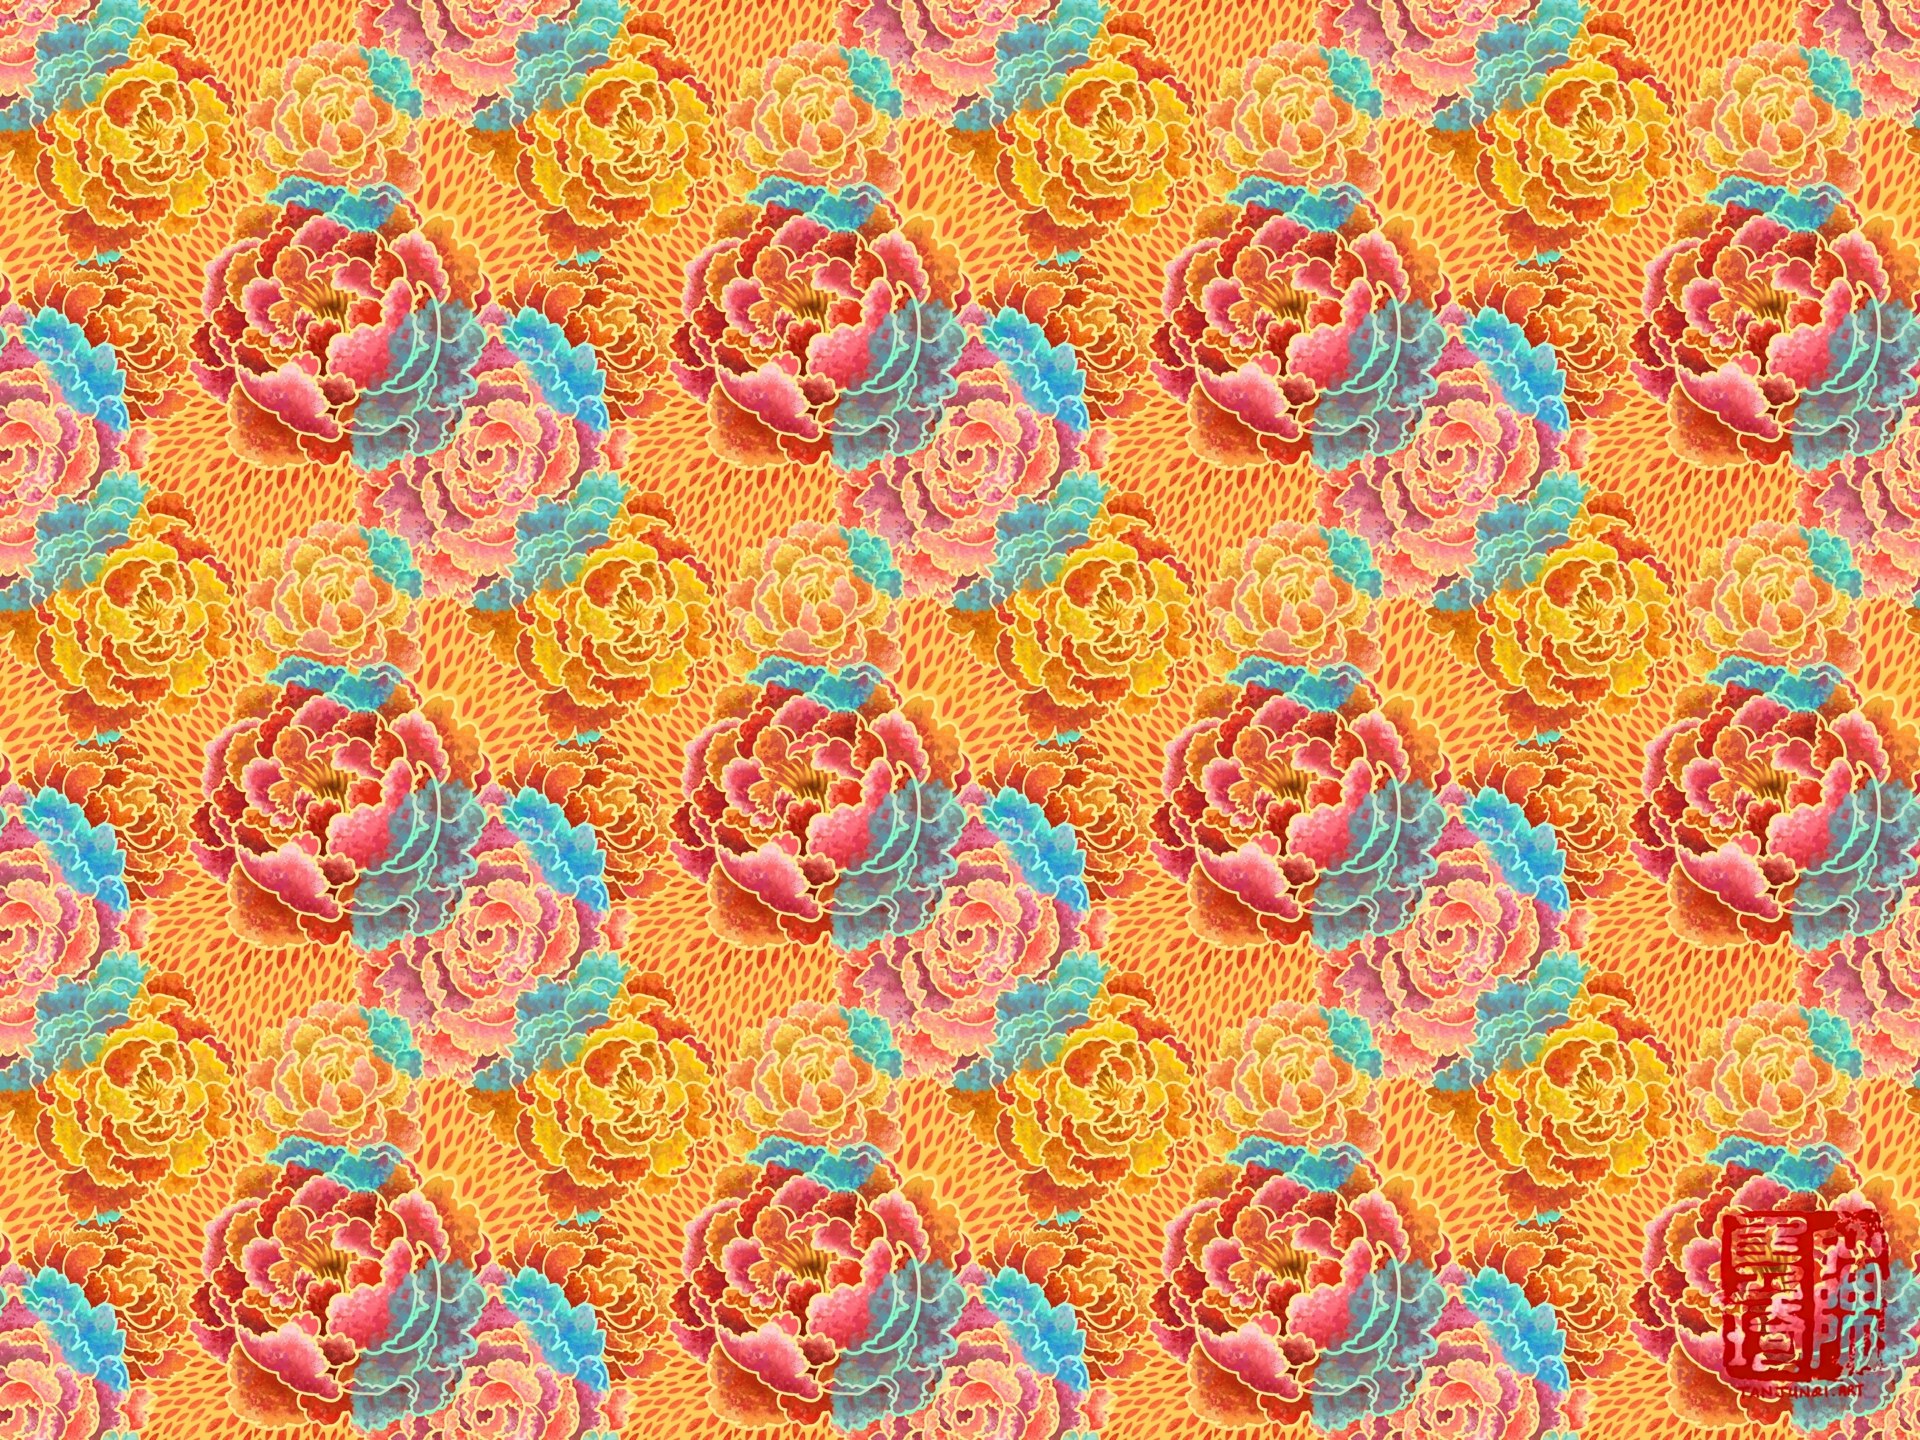 Digitally painted floral design of overlapping pink and orange peonies, done in a slightly graphic and textured style inspired by batik and Chinese papercuts. The peonies are different hues of pink and orange, while the outlines are golden, and their overlapping parts are light blue and turquoise, against a golden background with a teal pattern.